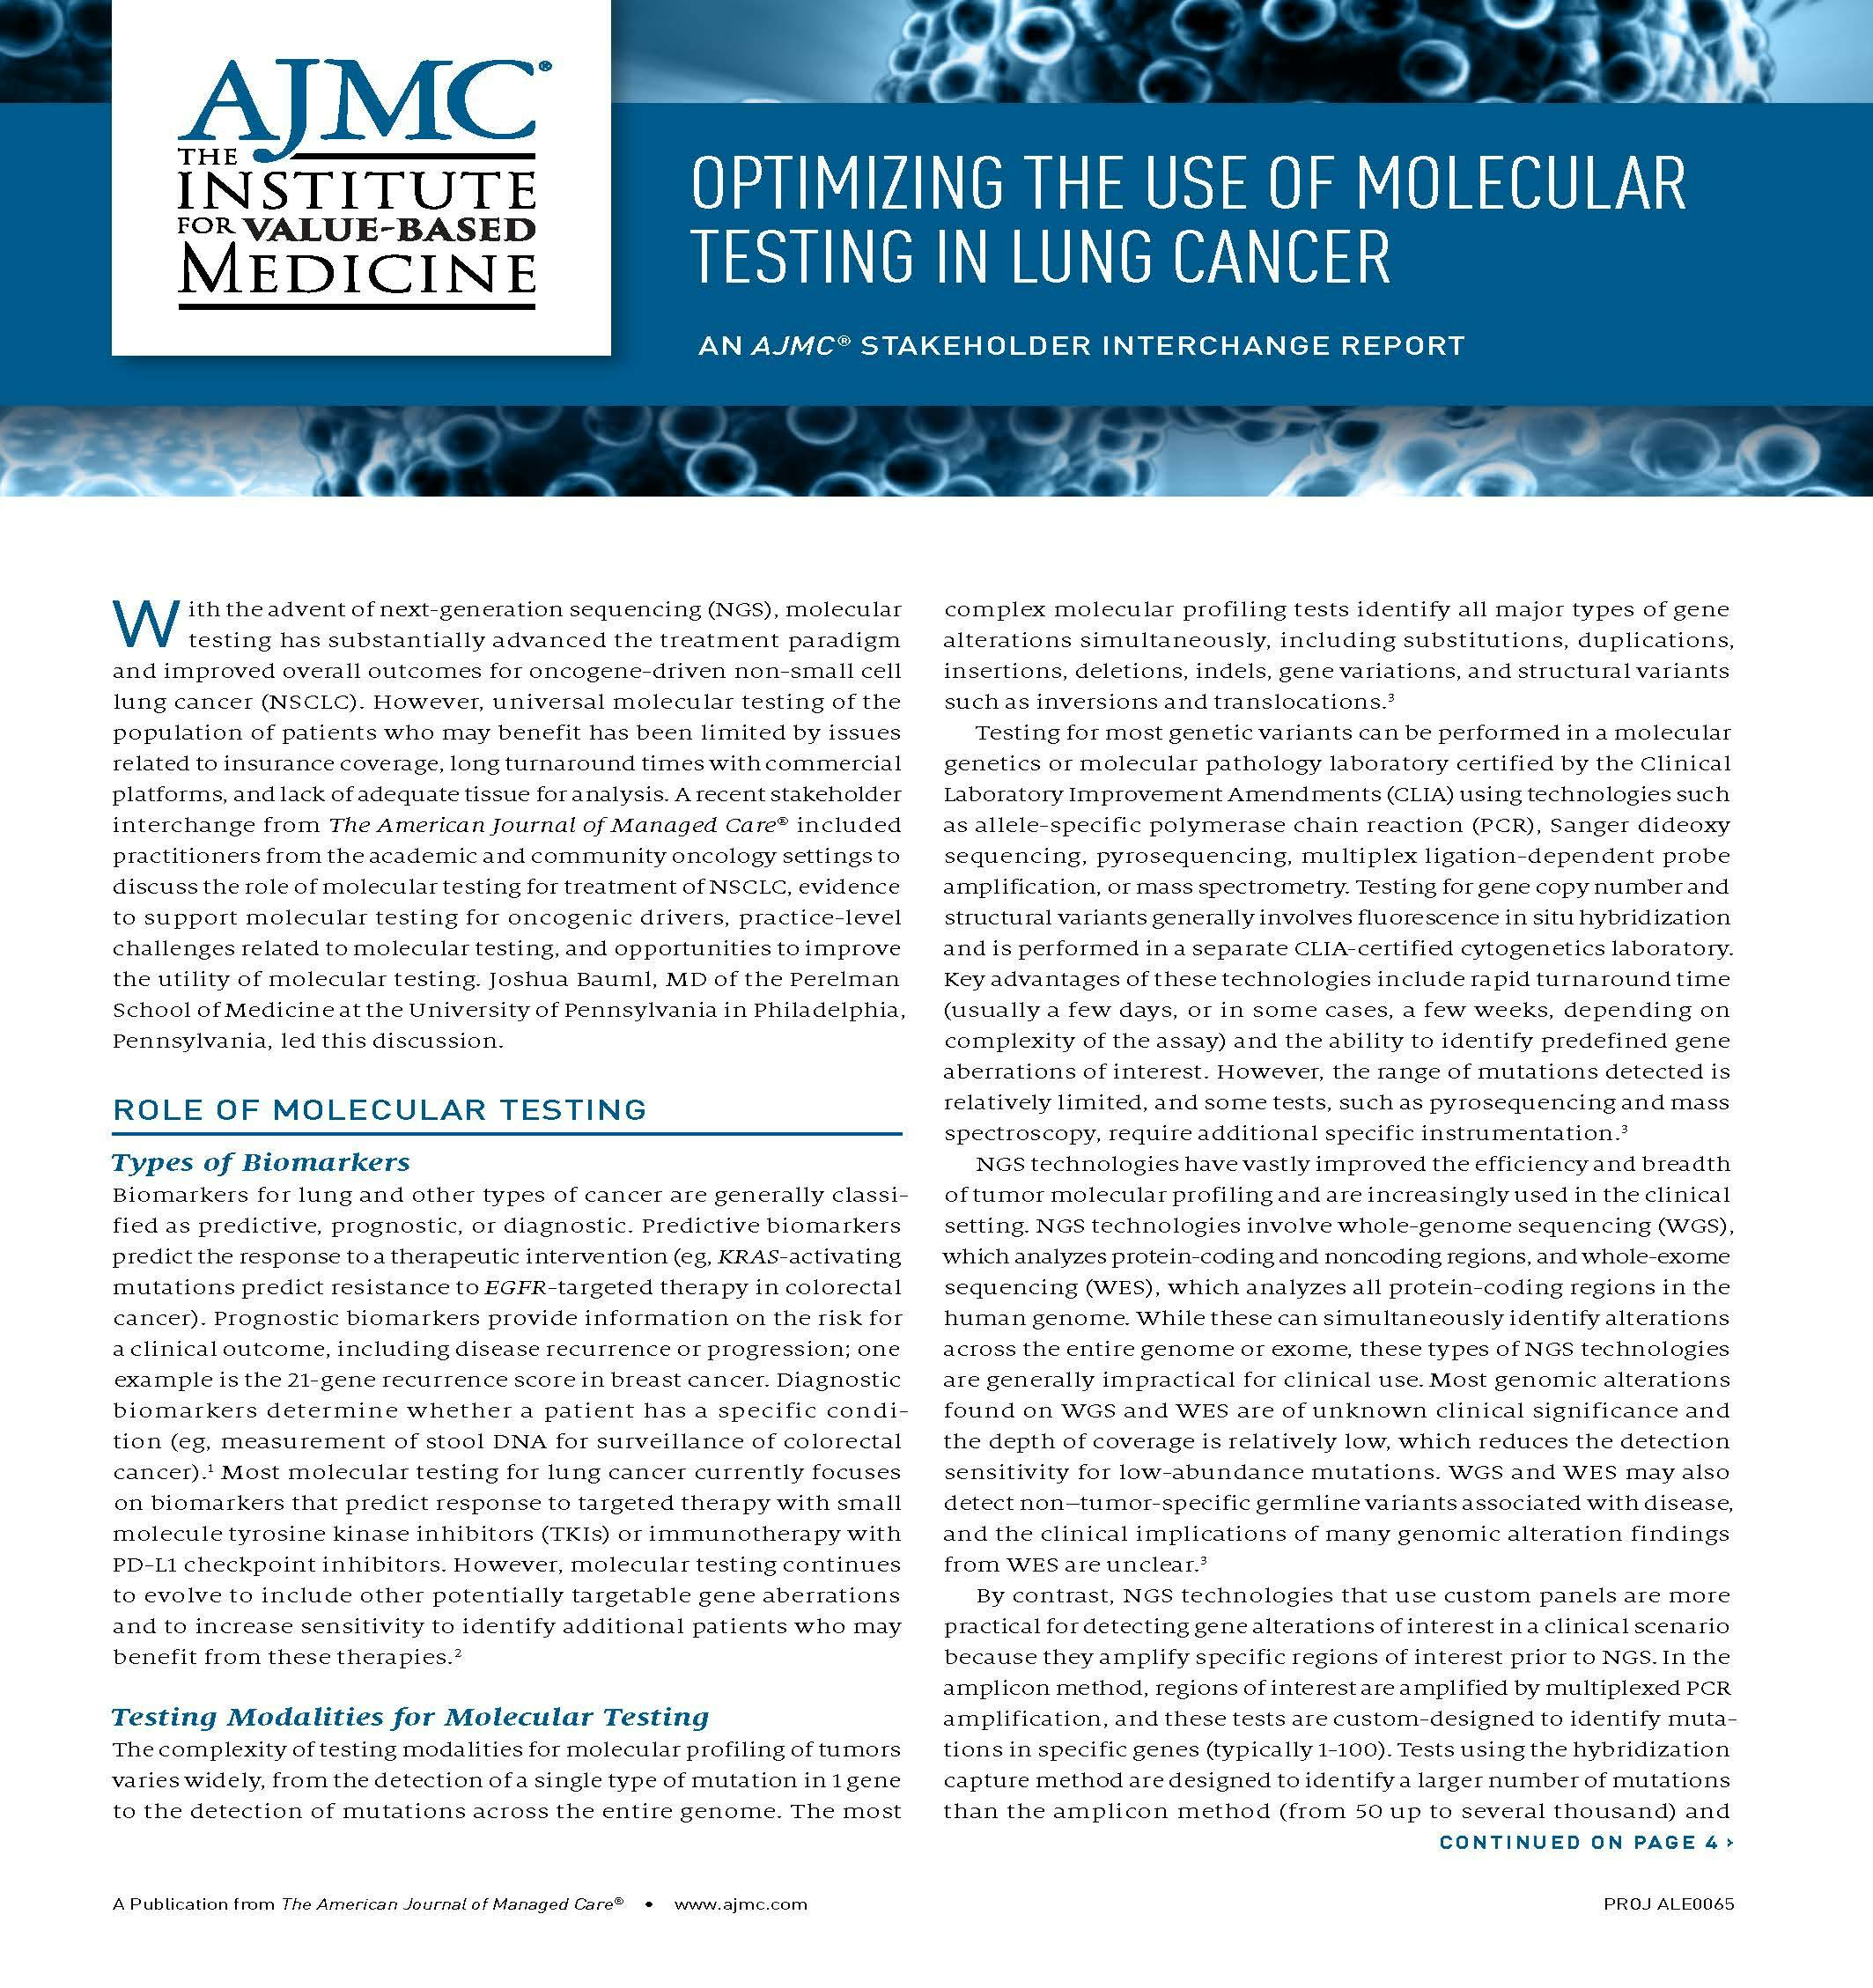 Optimizing the Use of Molecular Testing in Lung Cancer: An AJMC Stakeholder Interchange Report